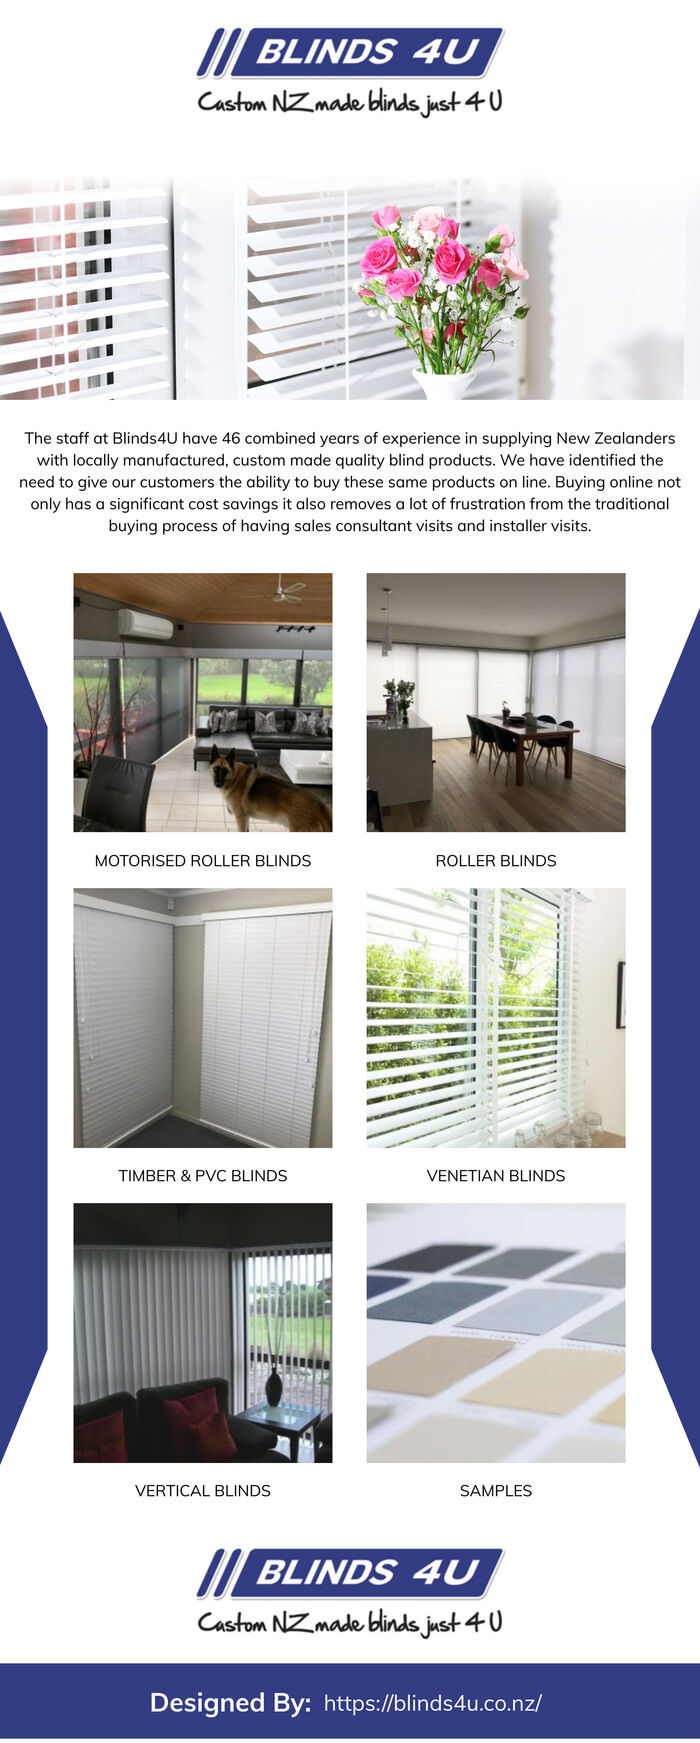 This infogrpahic is designed by Blinds 4 U